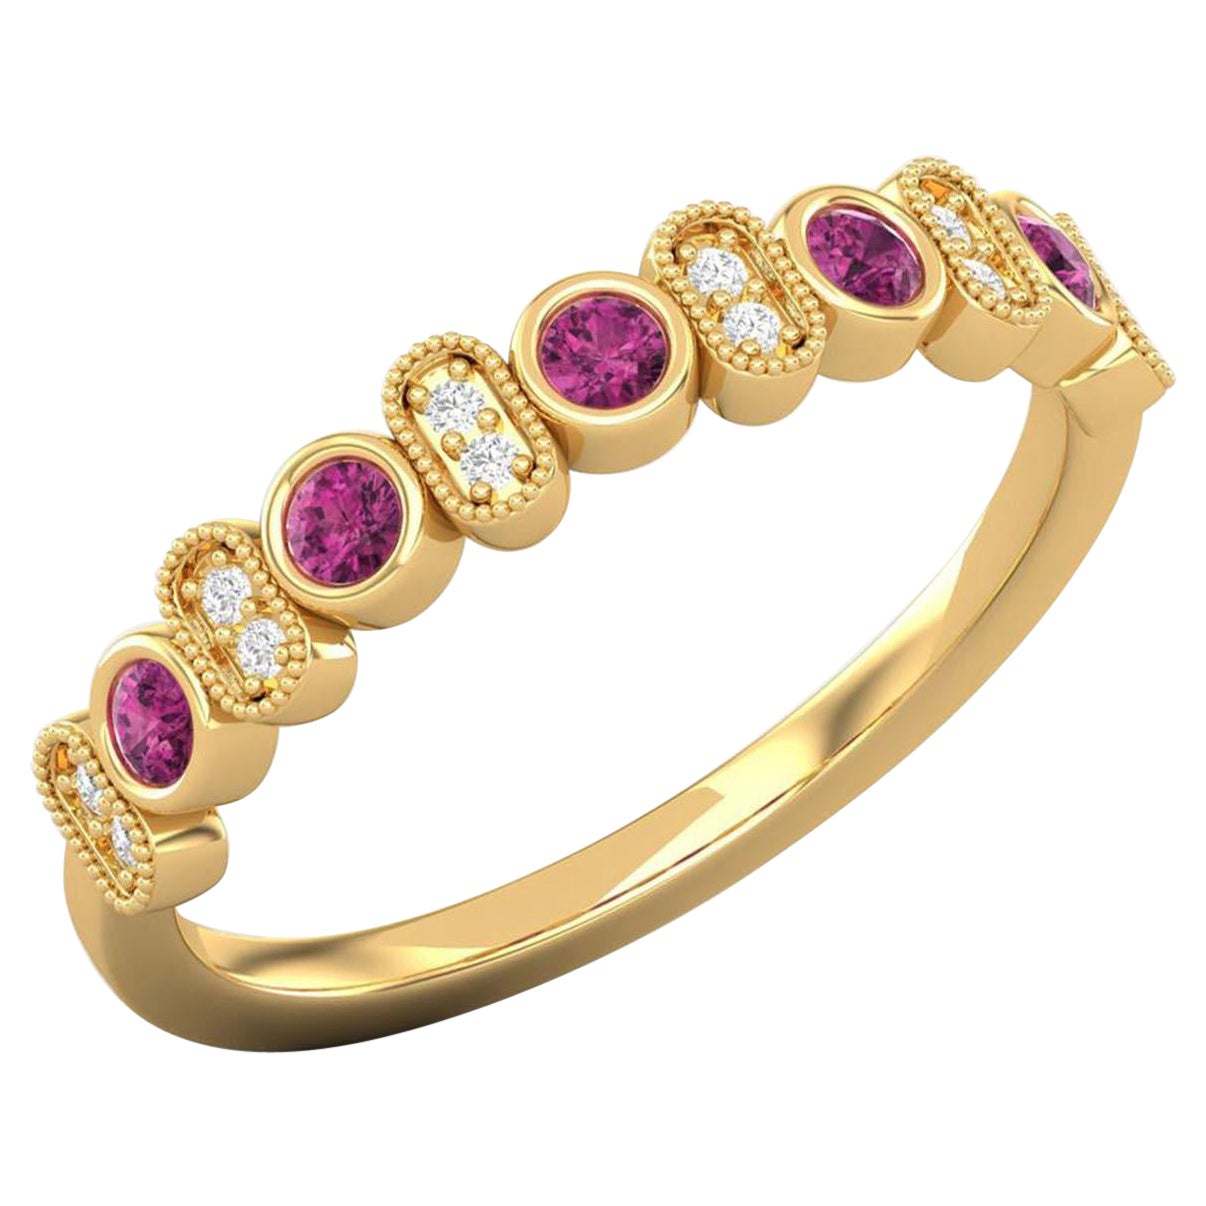 14 K Gold Diamond Ring / Rubellite Tourmaline Ring / Cluster Band For Sale